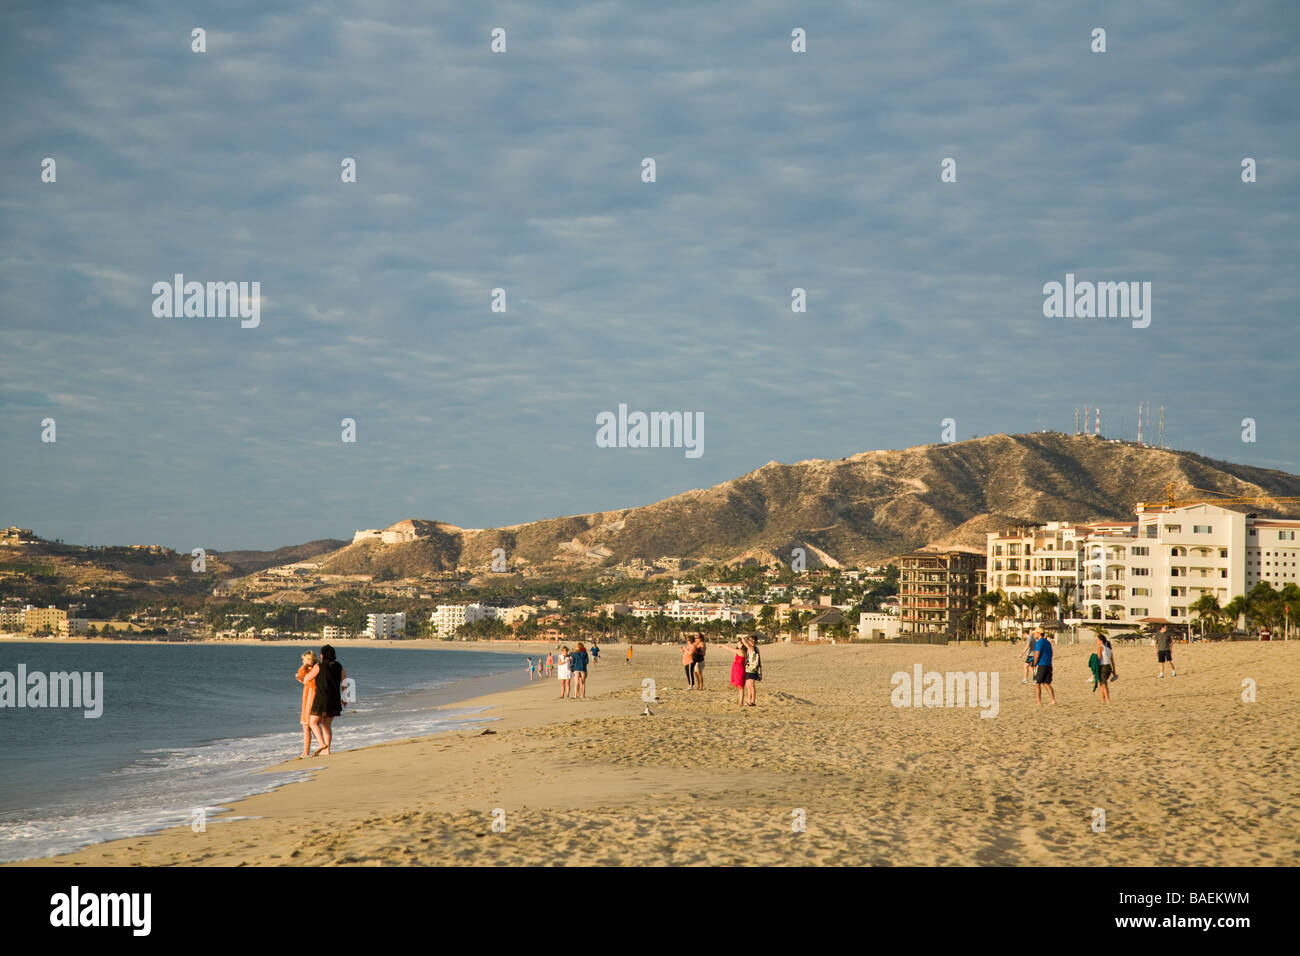 MEXICO San Jose del Cabo People walking and strolling along beach in early morning buildings on hillside Stock Photo